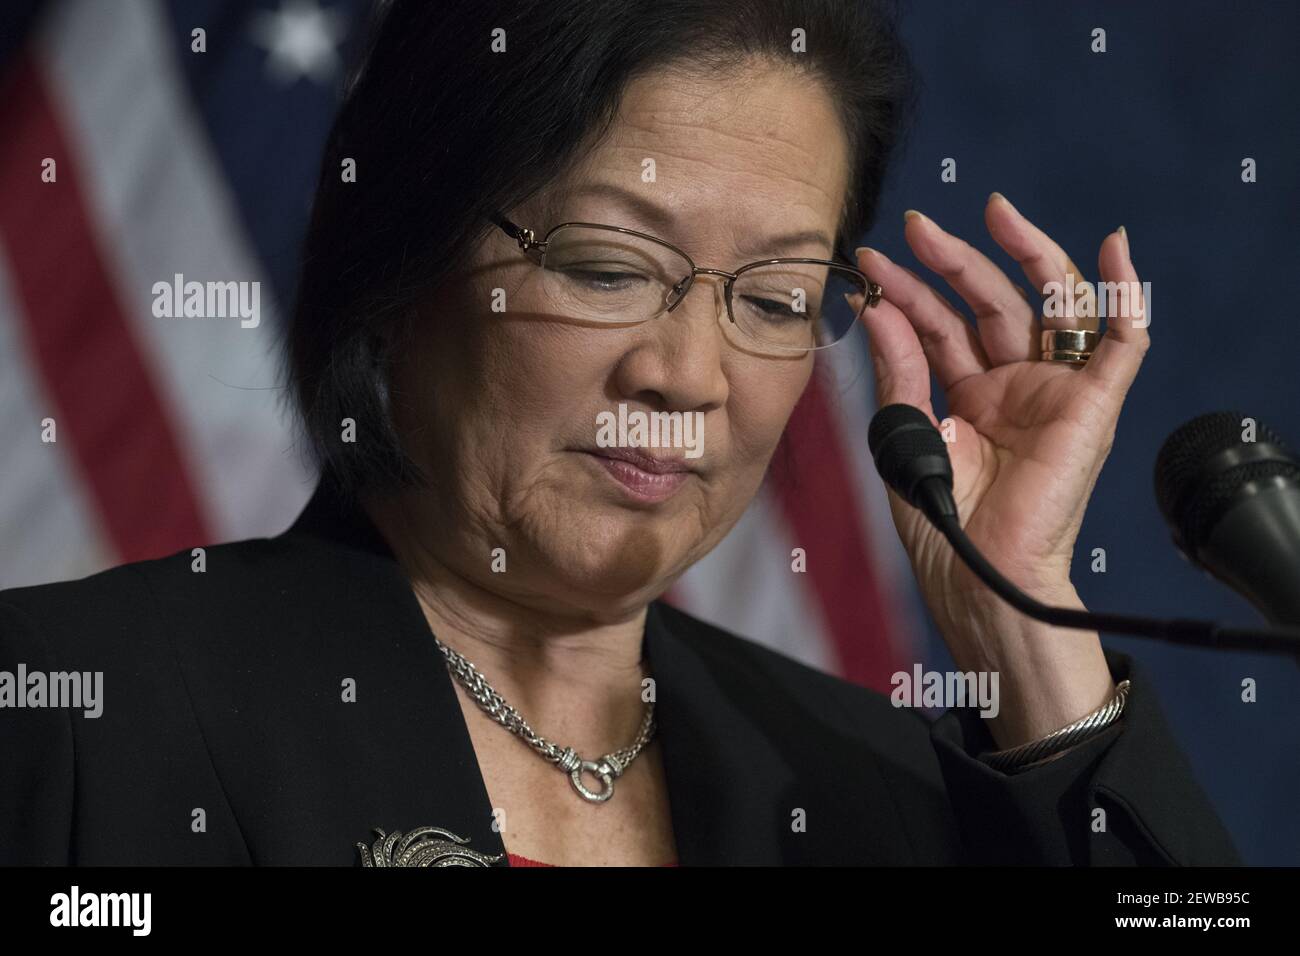 UNITED STATES - DECEMBER 14: Sen. Mazie Hirono, D-Hawaii, attends a news conference in the Capitol Visitor Center on Democrats' year end priorities including 'reauthorizing the Children's Health Insurance Program, funding community health centers, and passing the Dream Act,' on December 14, 2017. (Photo By Tom Williams/CQ Roll Call) Stock Photo